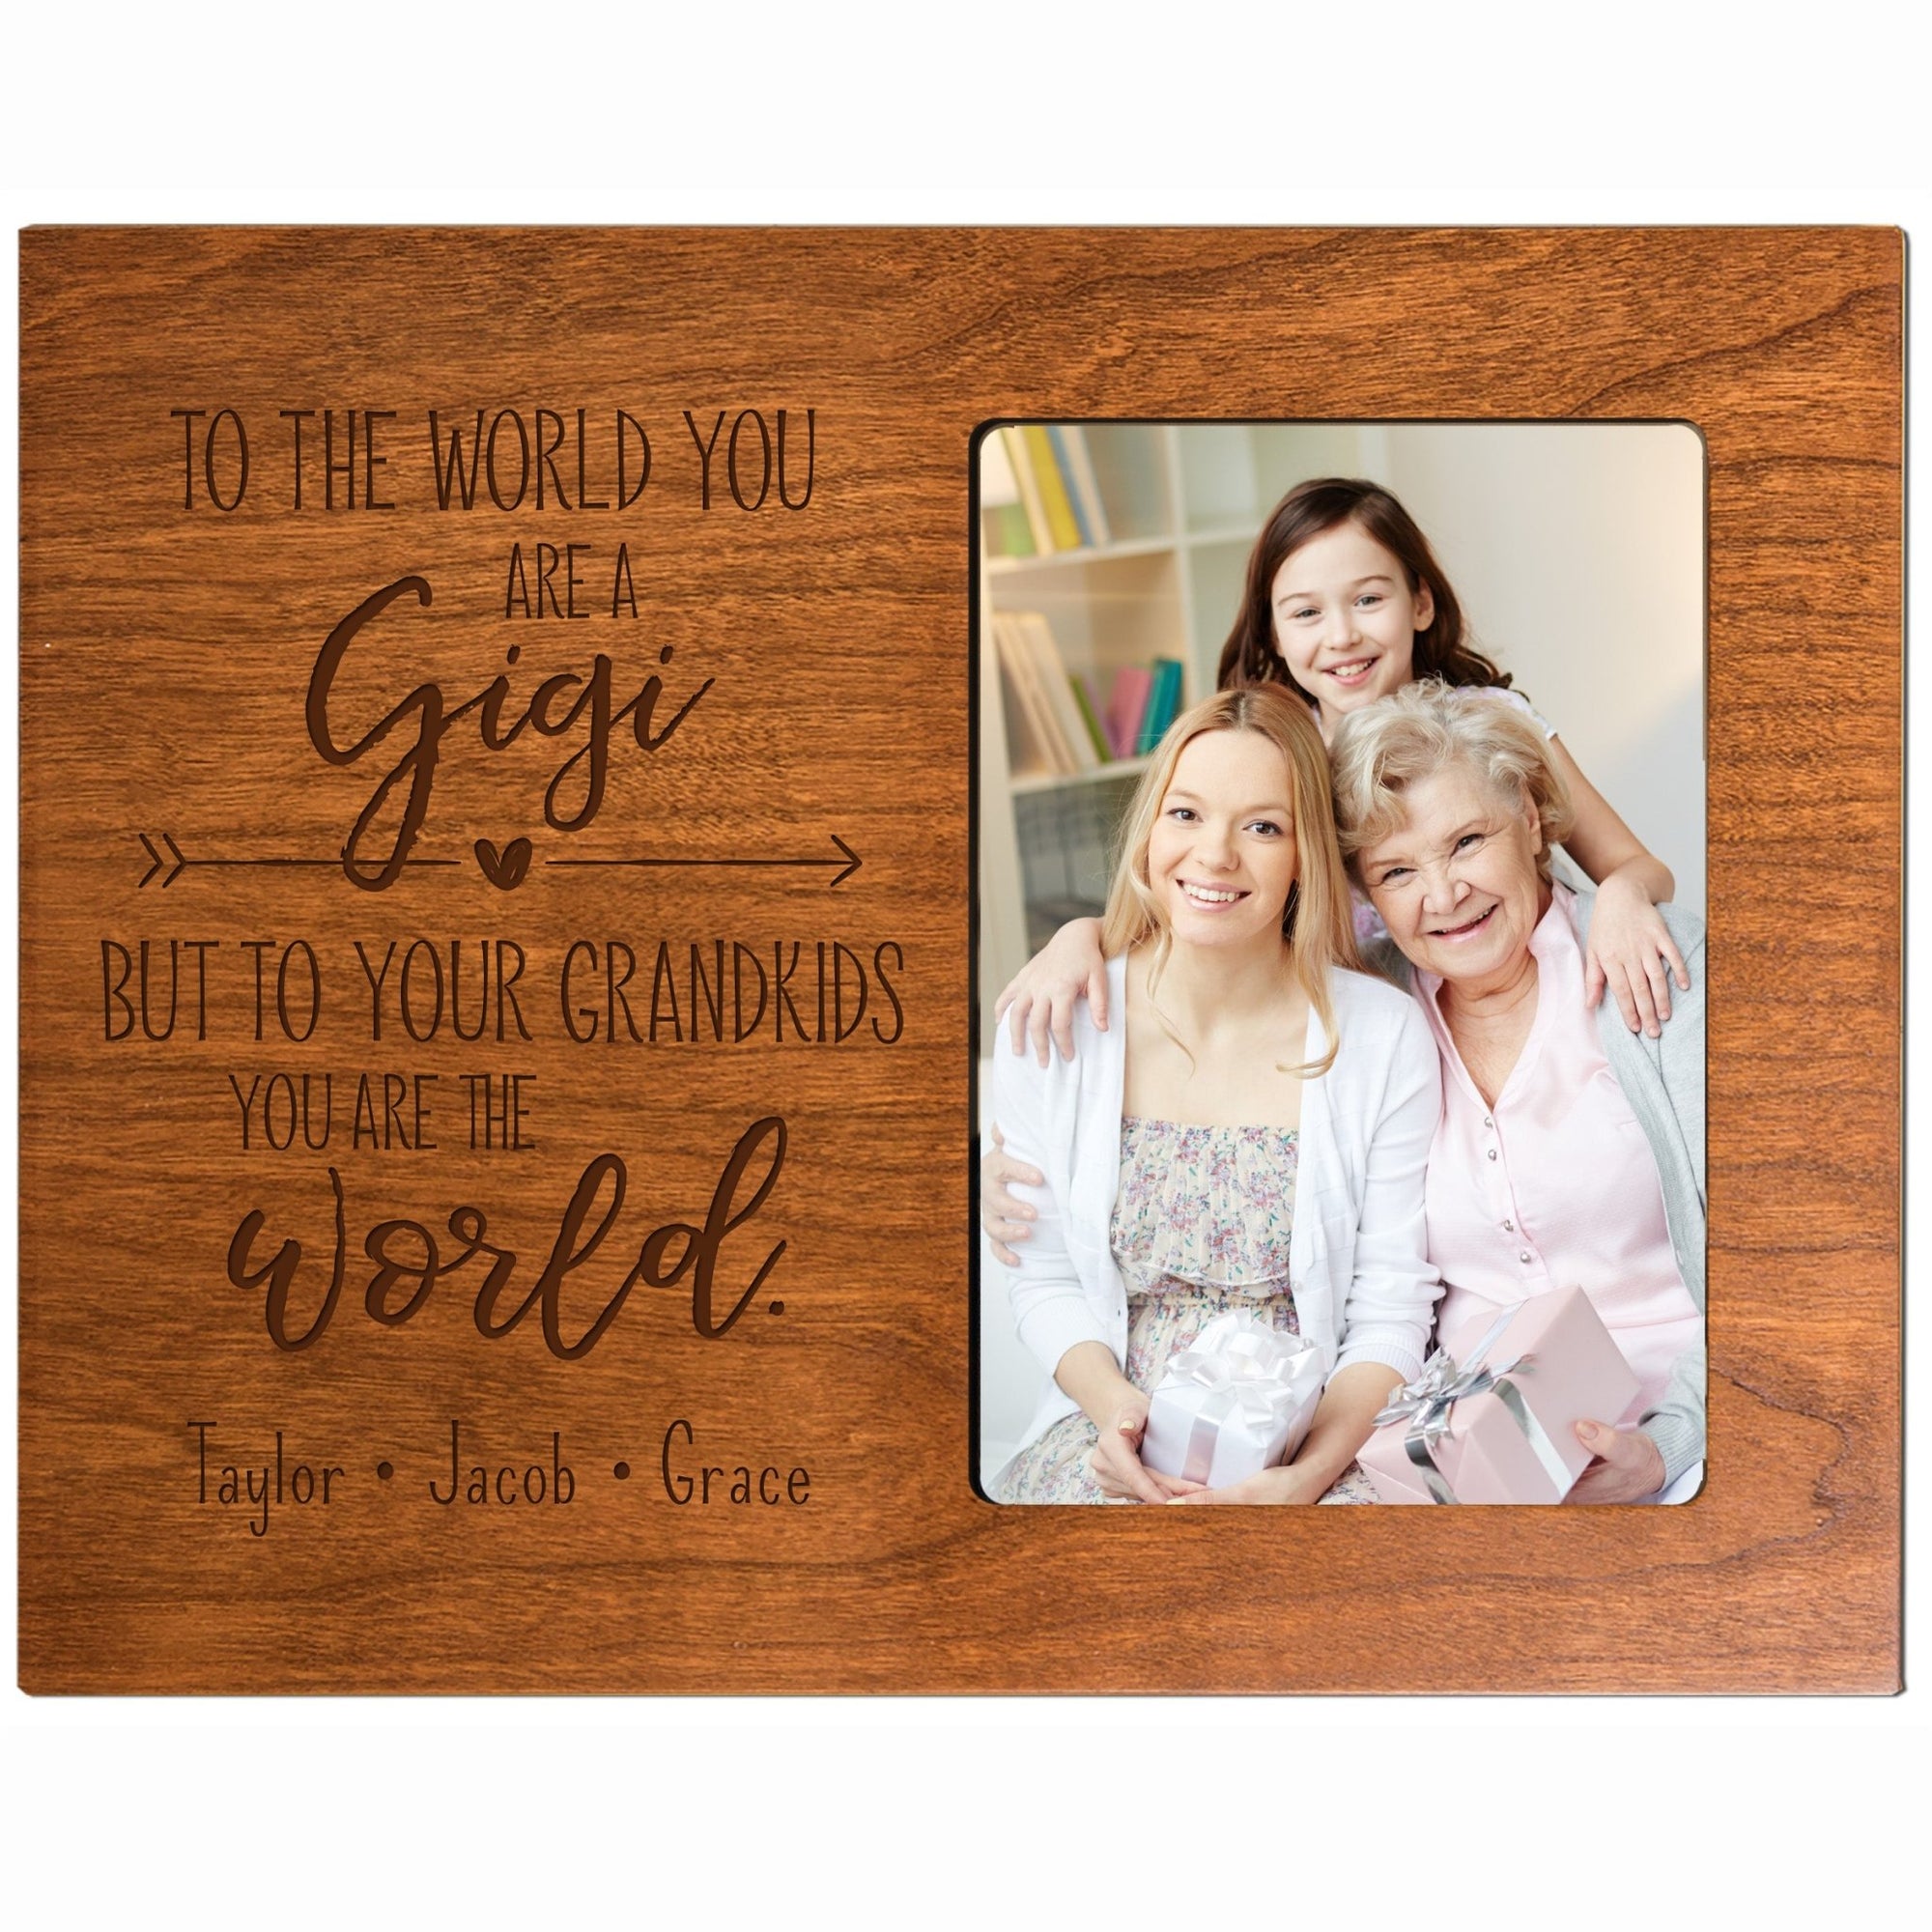 Personalized Mother’s Day Frame 4” x 6” Photo to The World Gigi - LifeSong Milestones